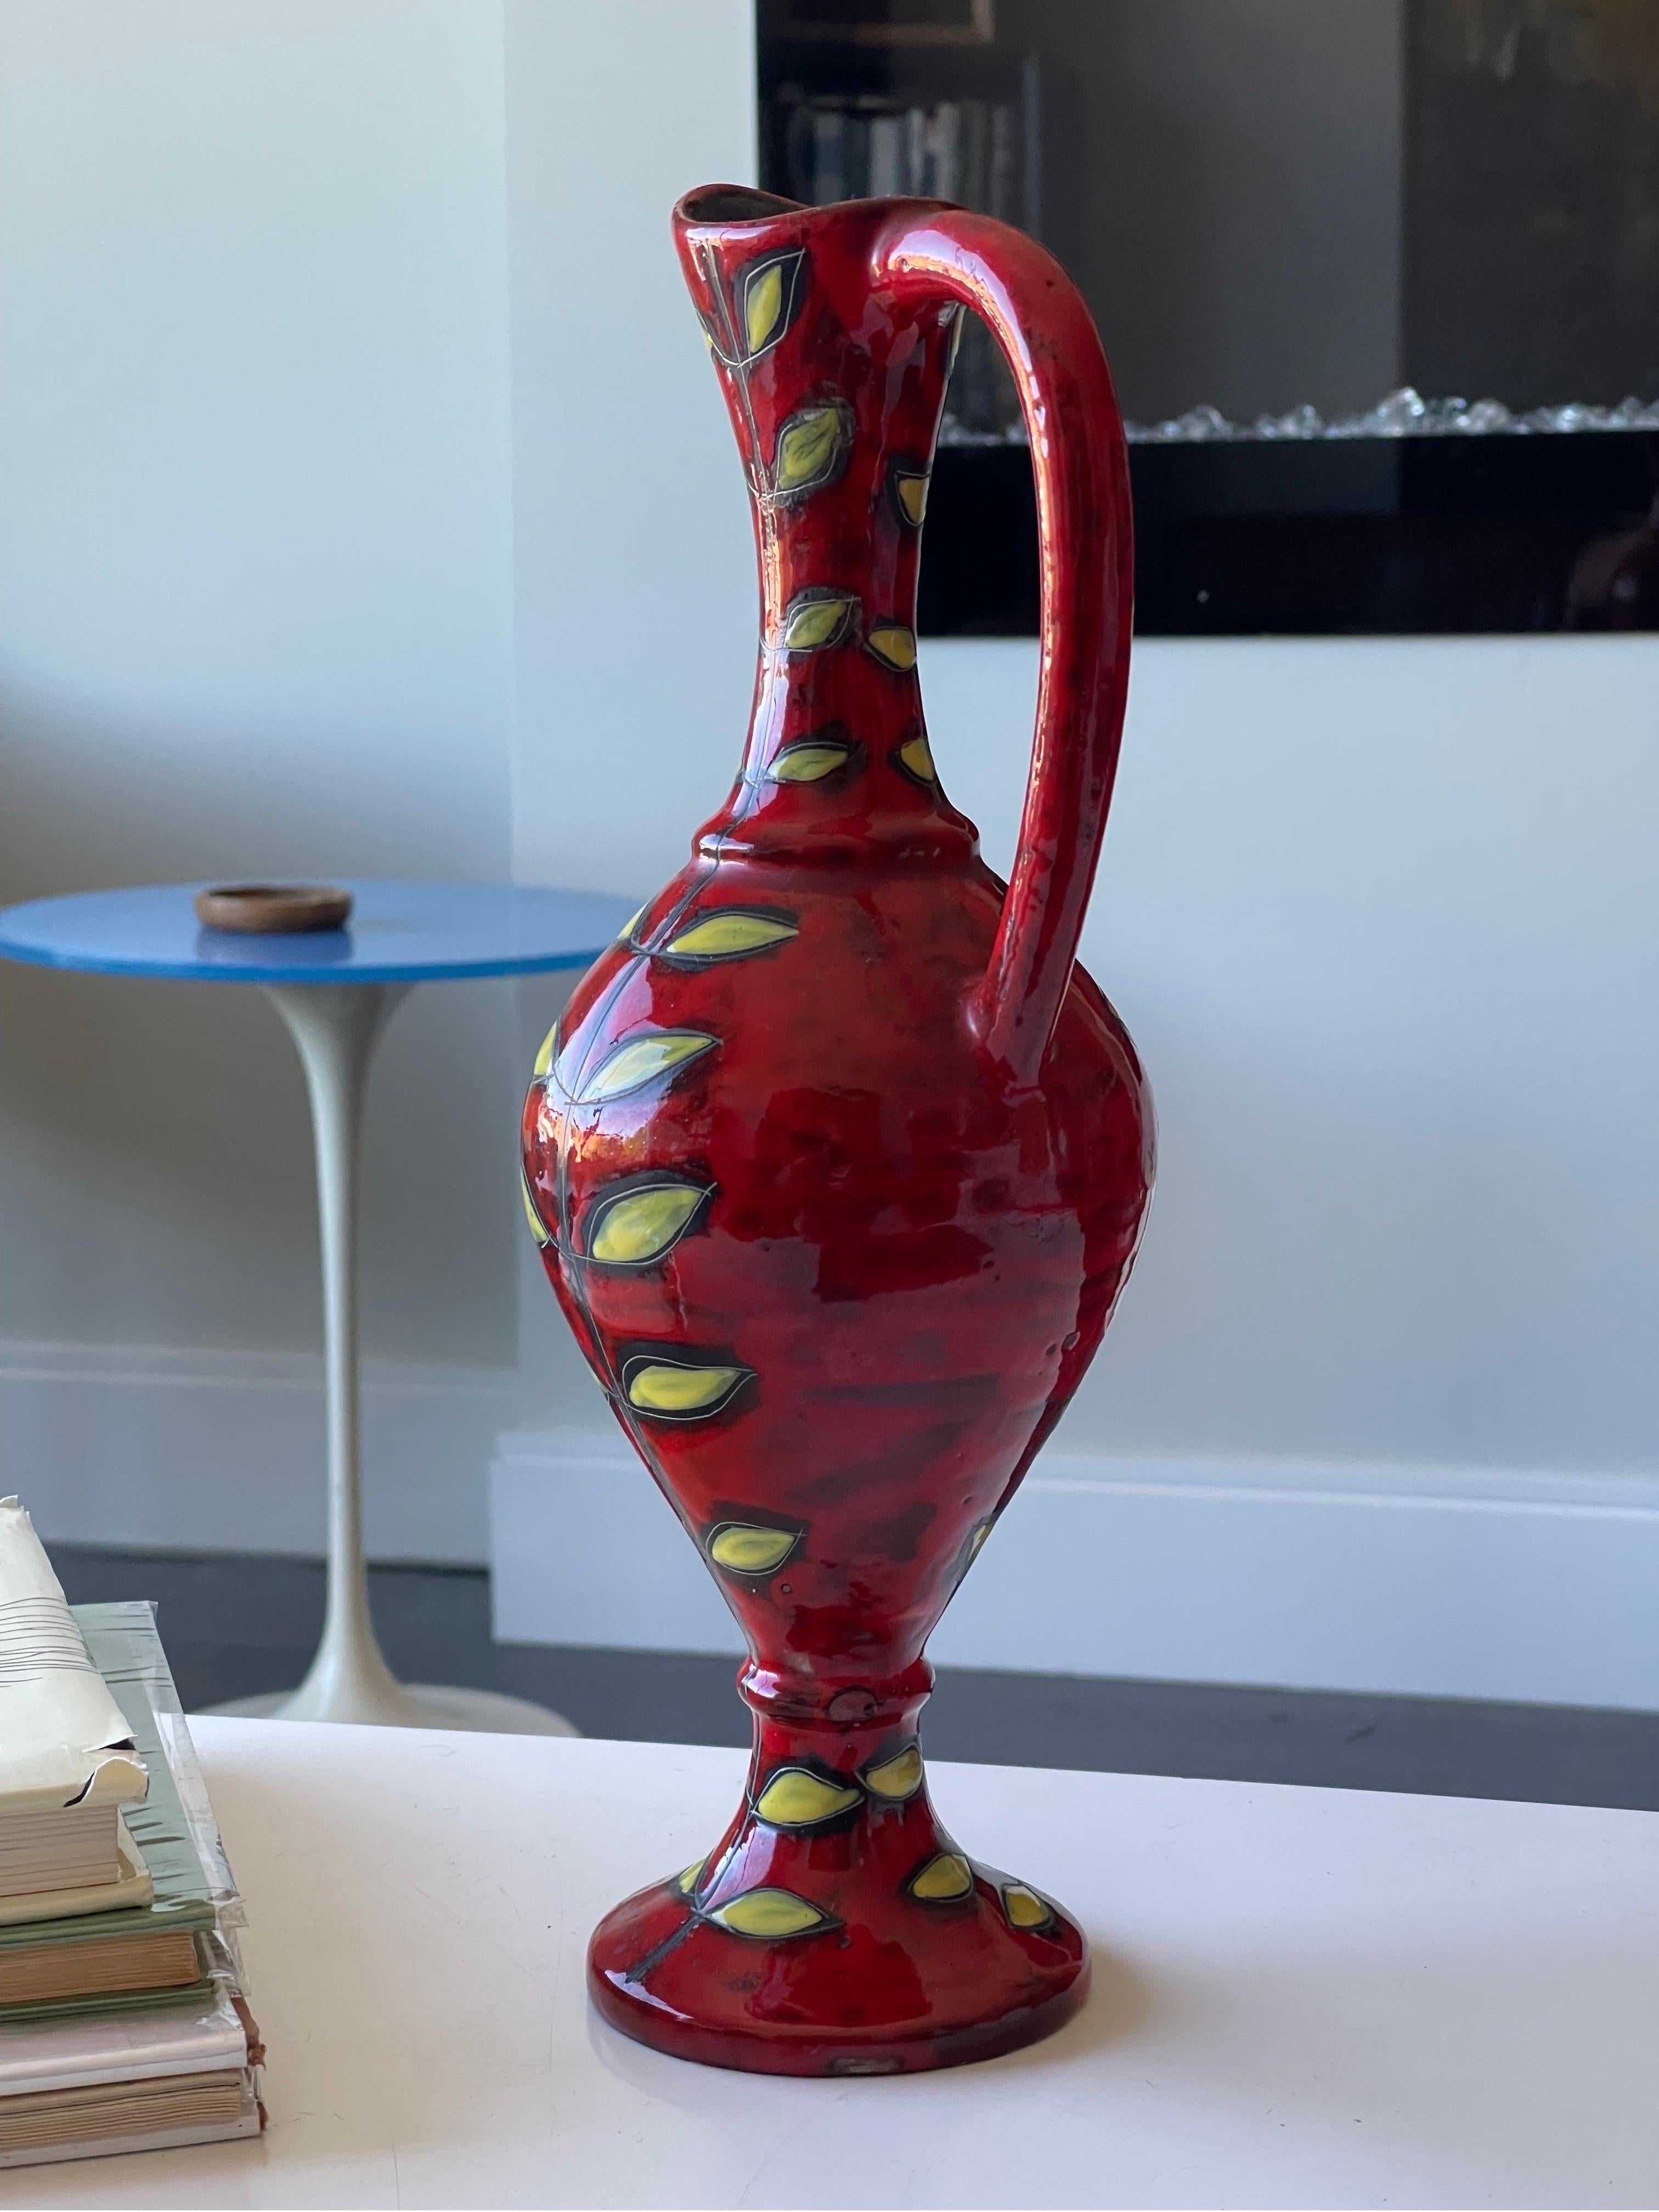 Mid-20th Century Exquisite Italian Ceramic Vase or Pitcher by Fantoni for Raymor For Sale